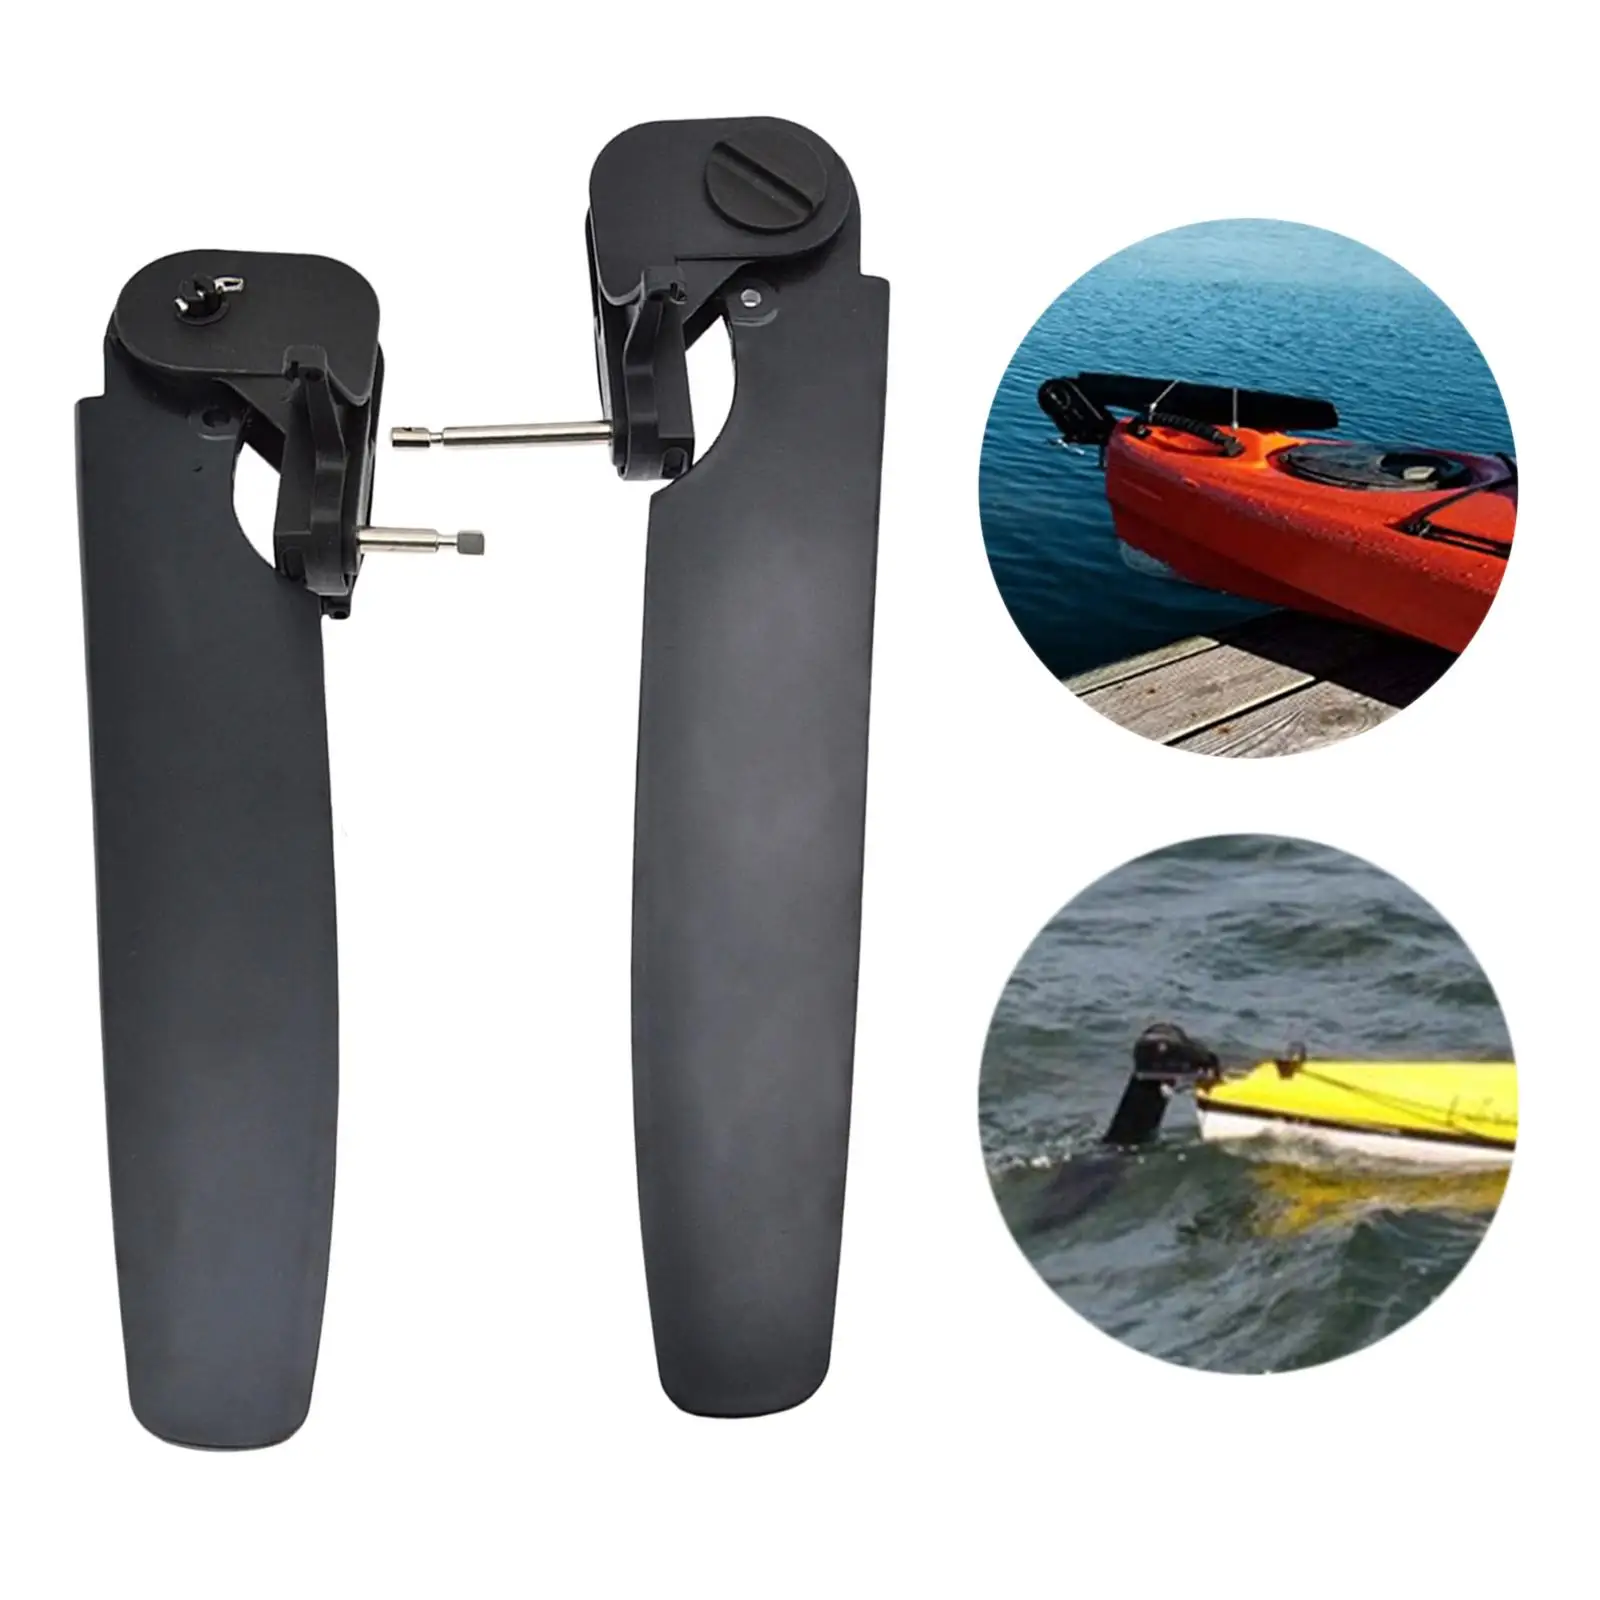 Watercraft Canoe Kayak Boat Rudder Foot Control Direction With Stand support kit 